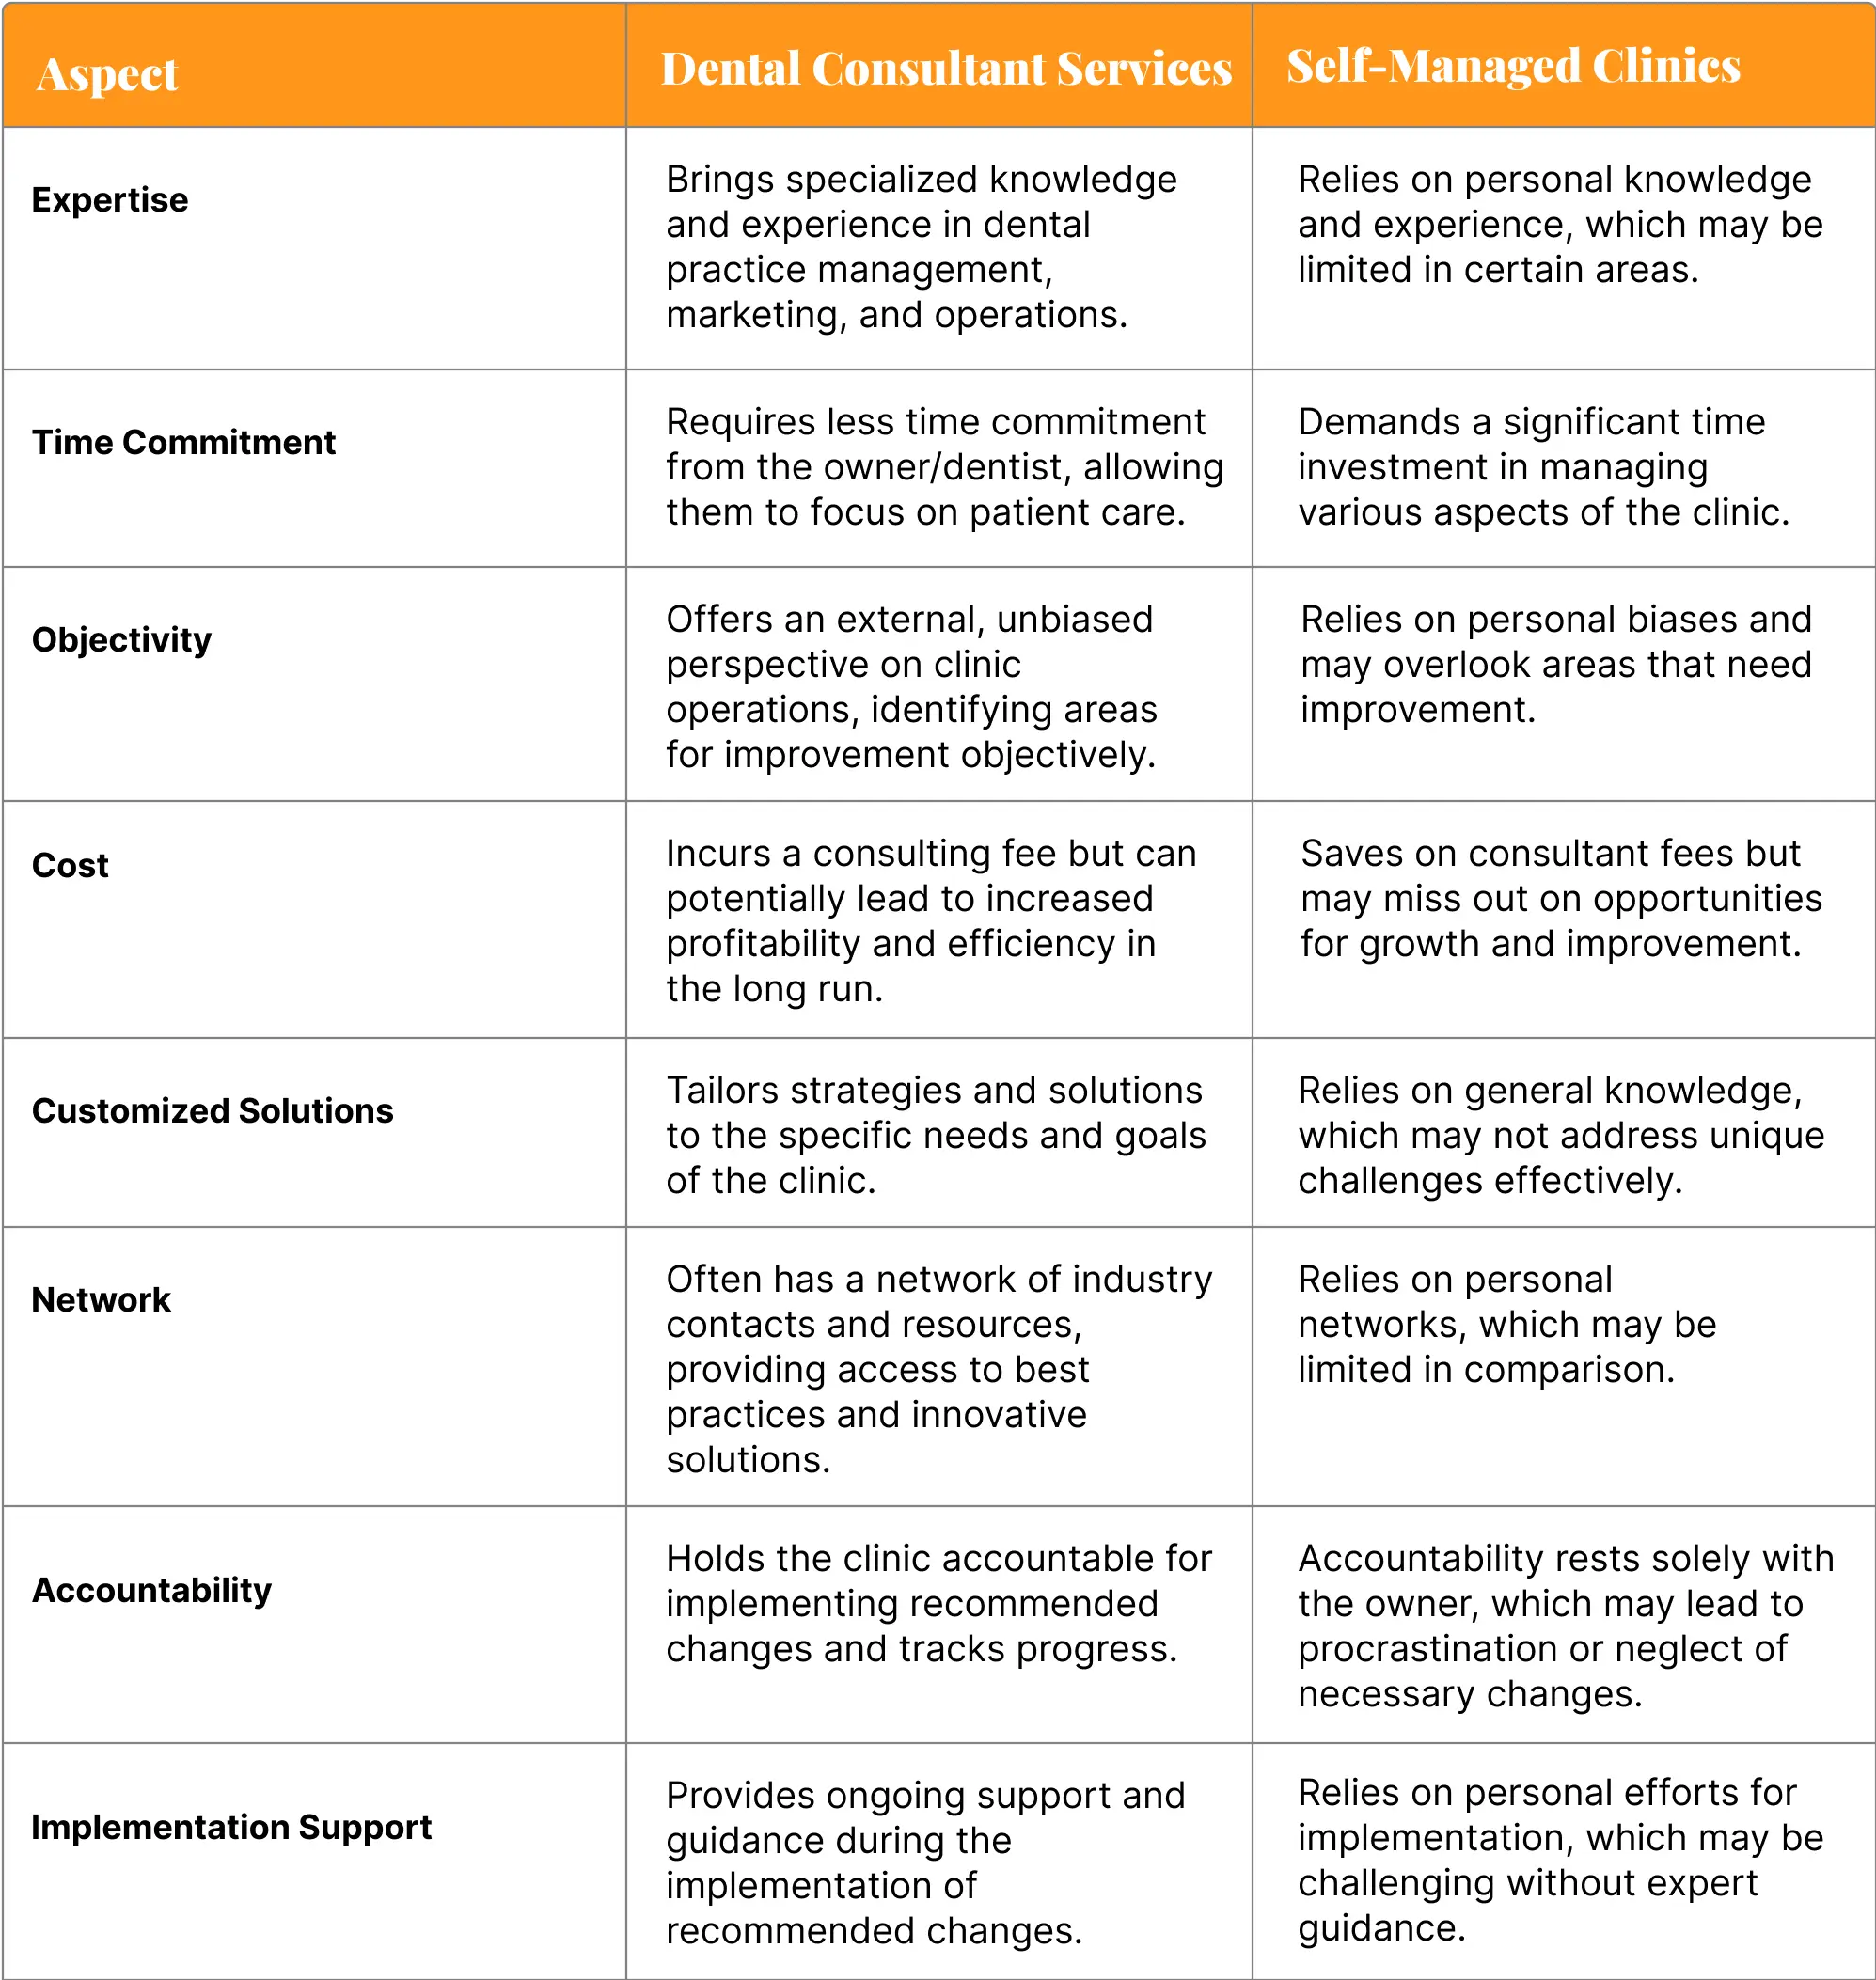 comparison-table-dental-consulting-services-vs-self-managed-clinics